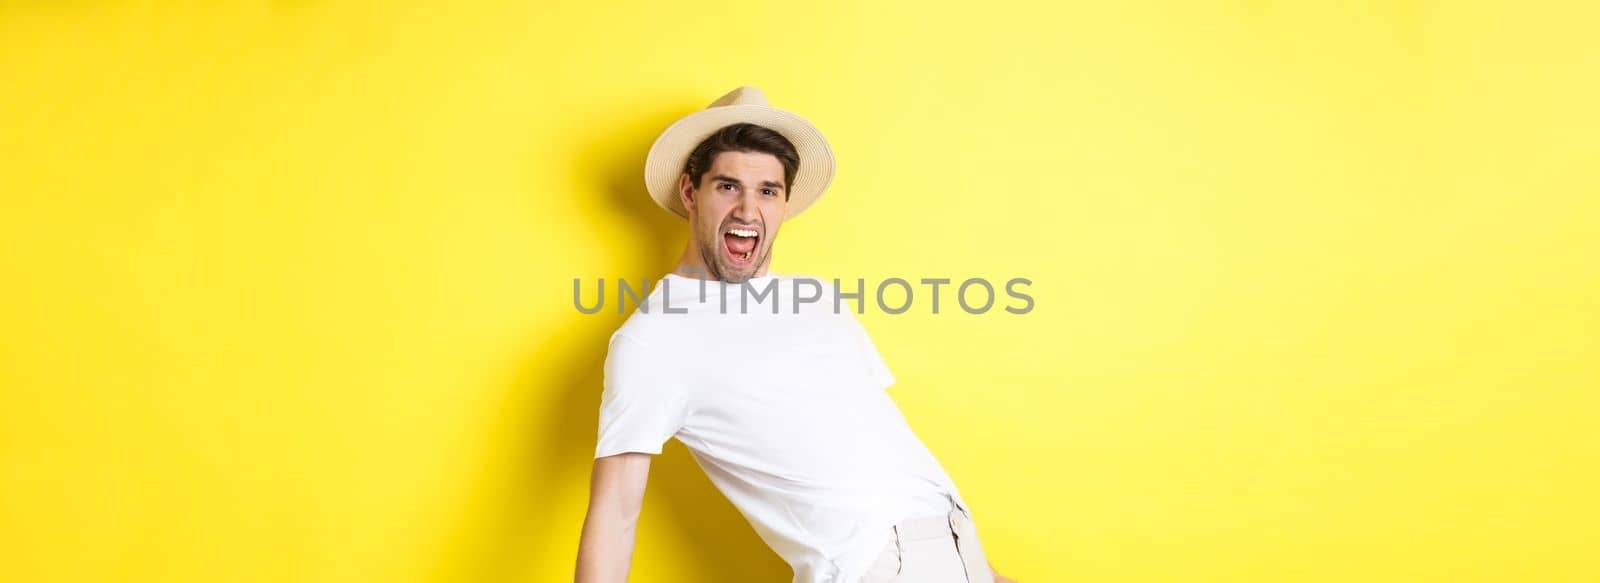 Concept of tourism and vacation. Excited young man tourist celebrating, shouting for joy and dancing, standing over yellow background.